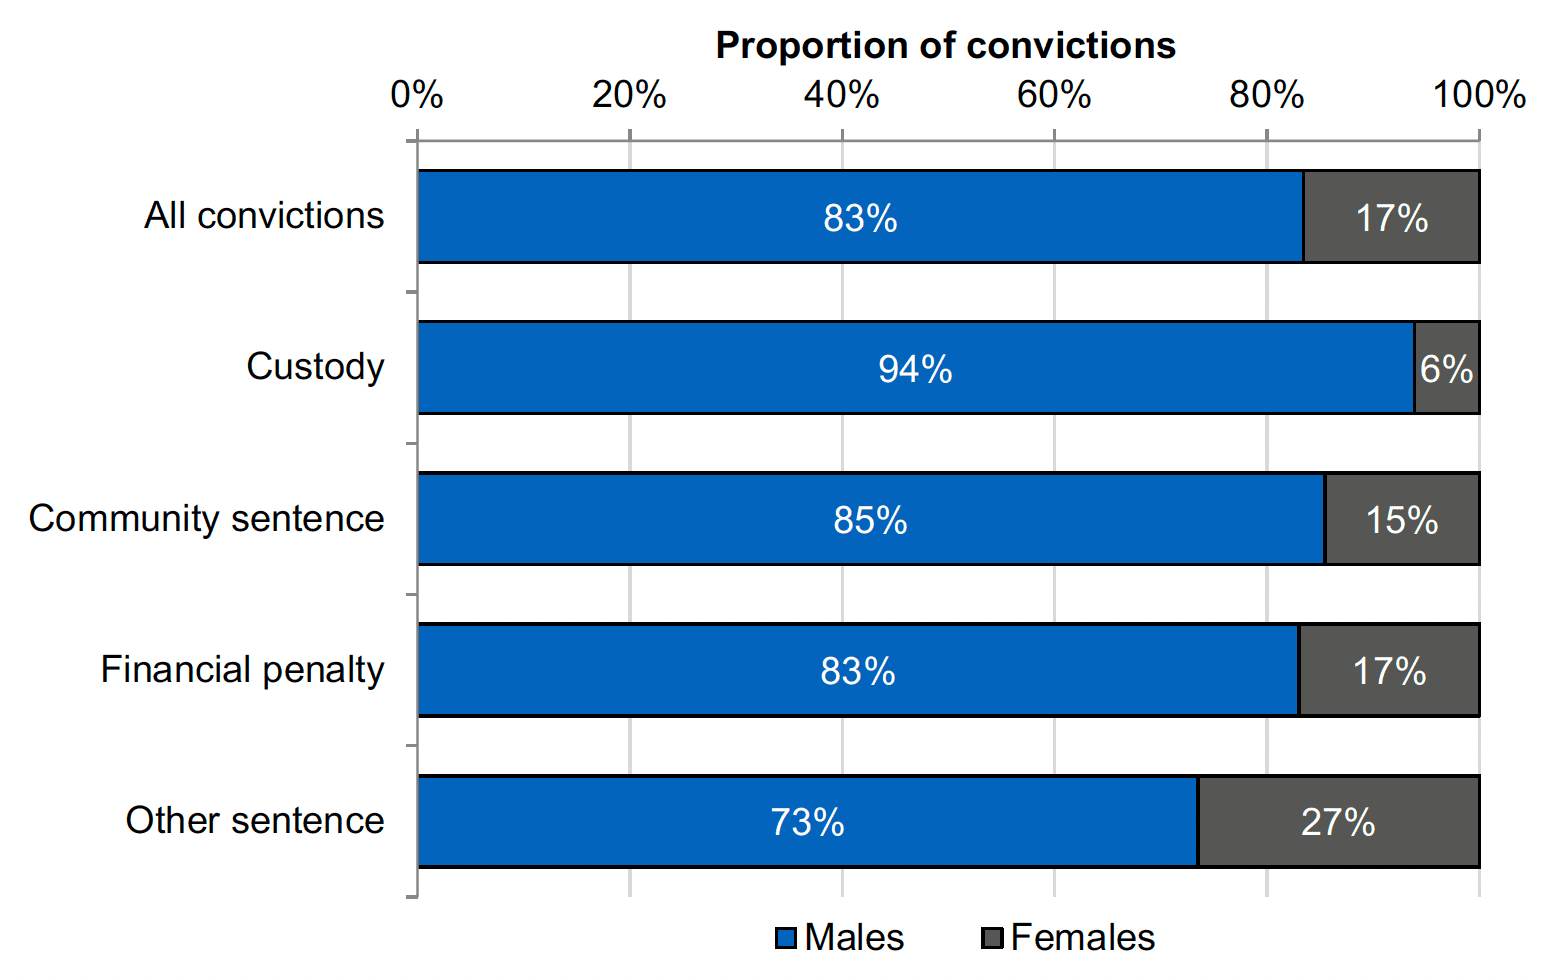 A stacked bar chart showing that males make up the majority of convictions for all disposal types in 2021-22. Males make up 83% of all convictions, and have higher proportions for Custody (94%) and Community sentence (85%).